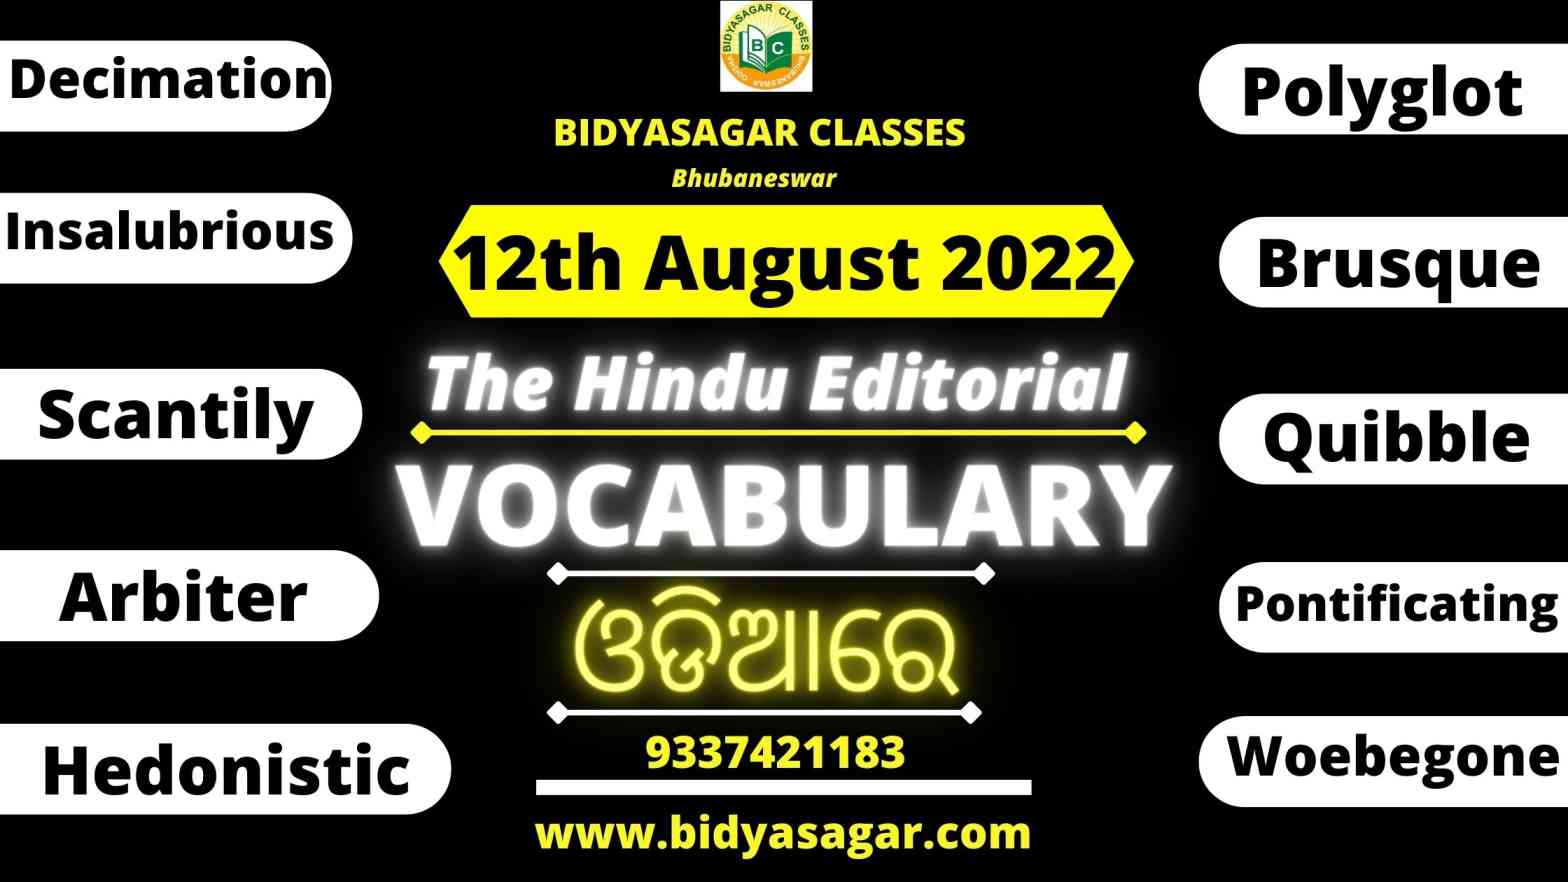 The Hindu Editorial Vocabulary of 12th August 2022